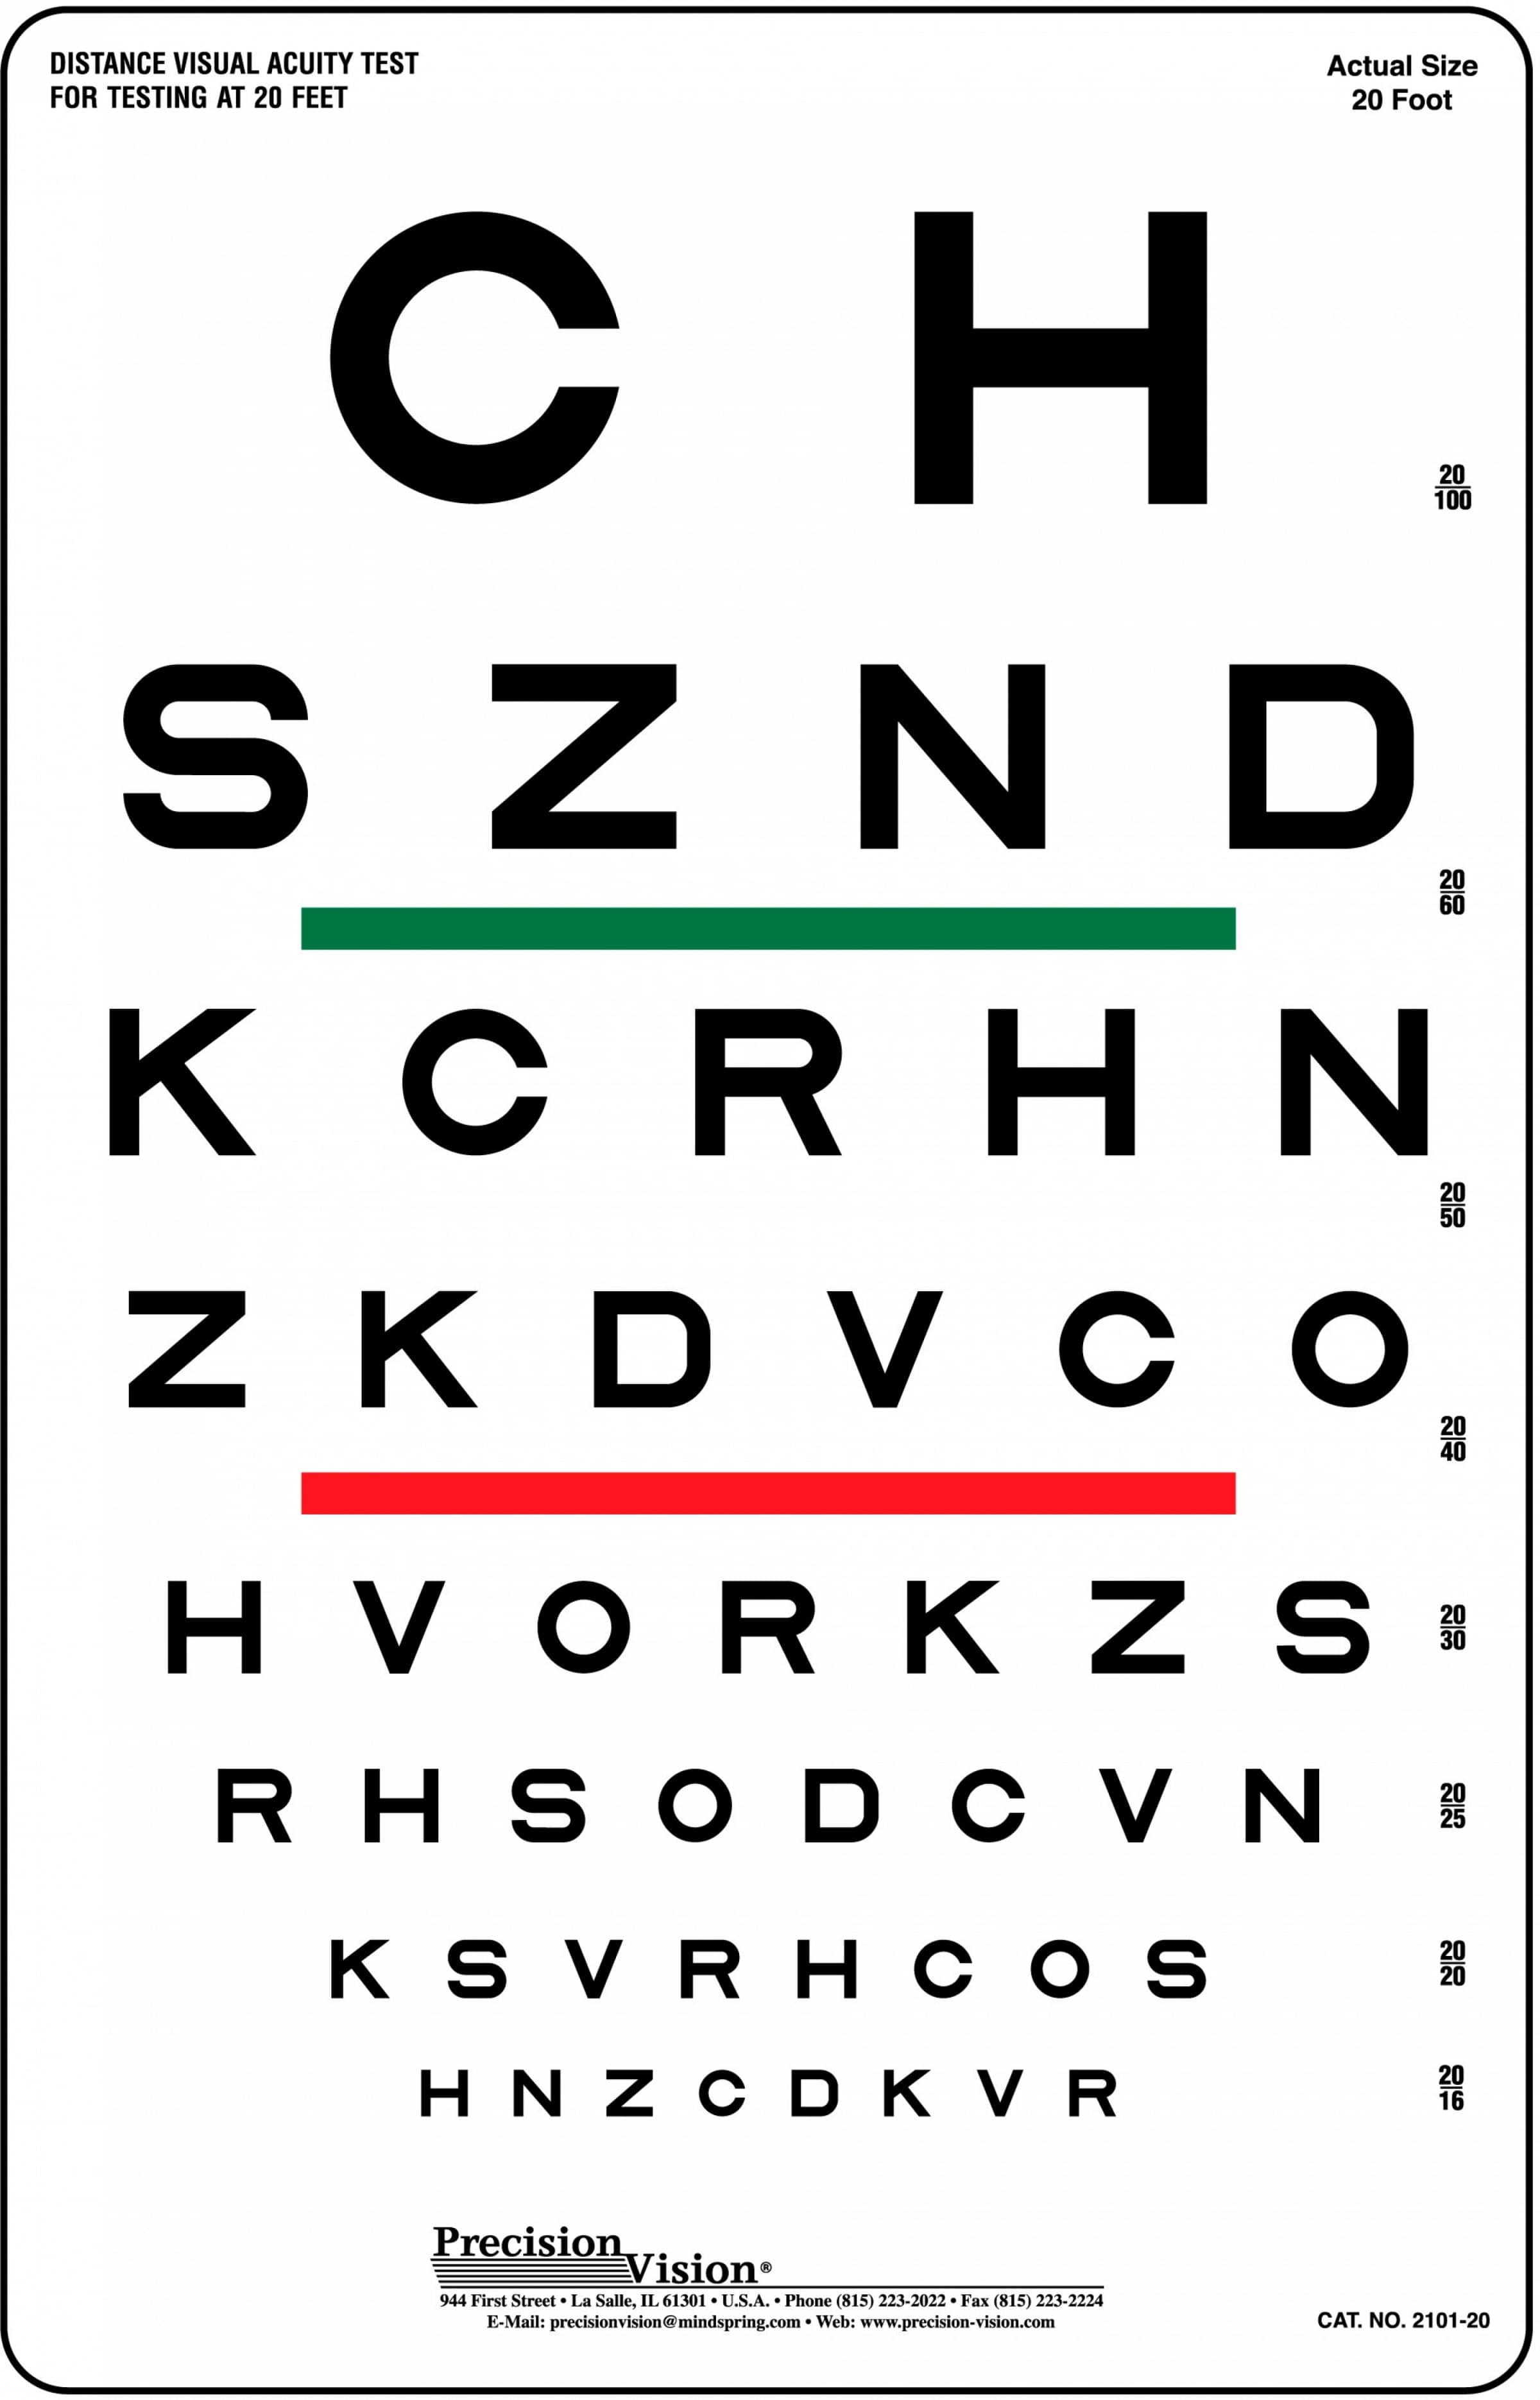 sloan-striped-visual-acuity-chart-precision-vision